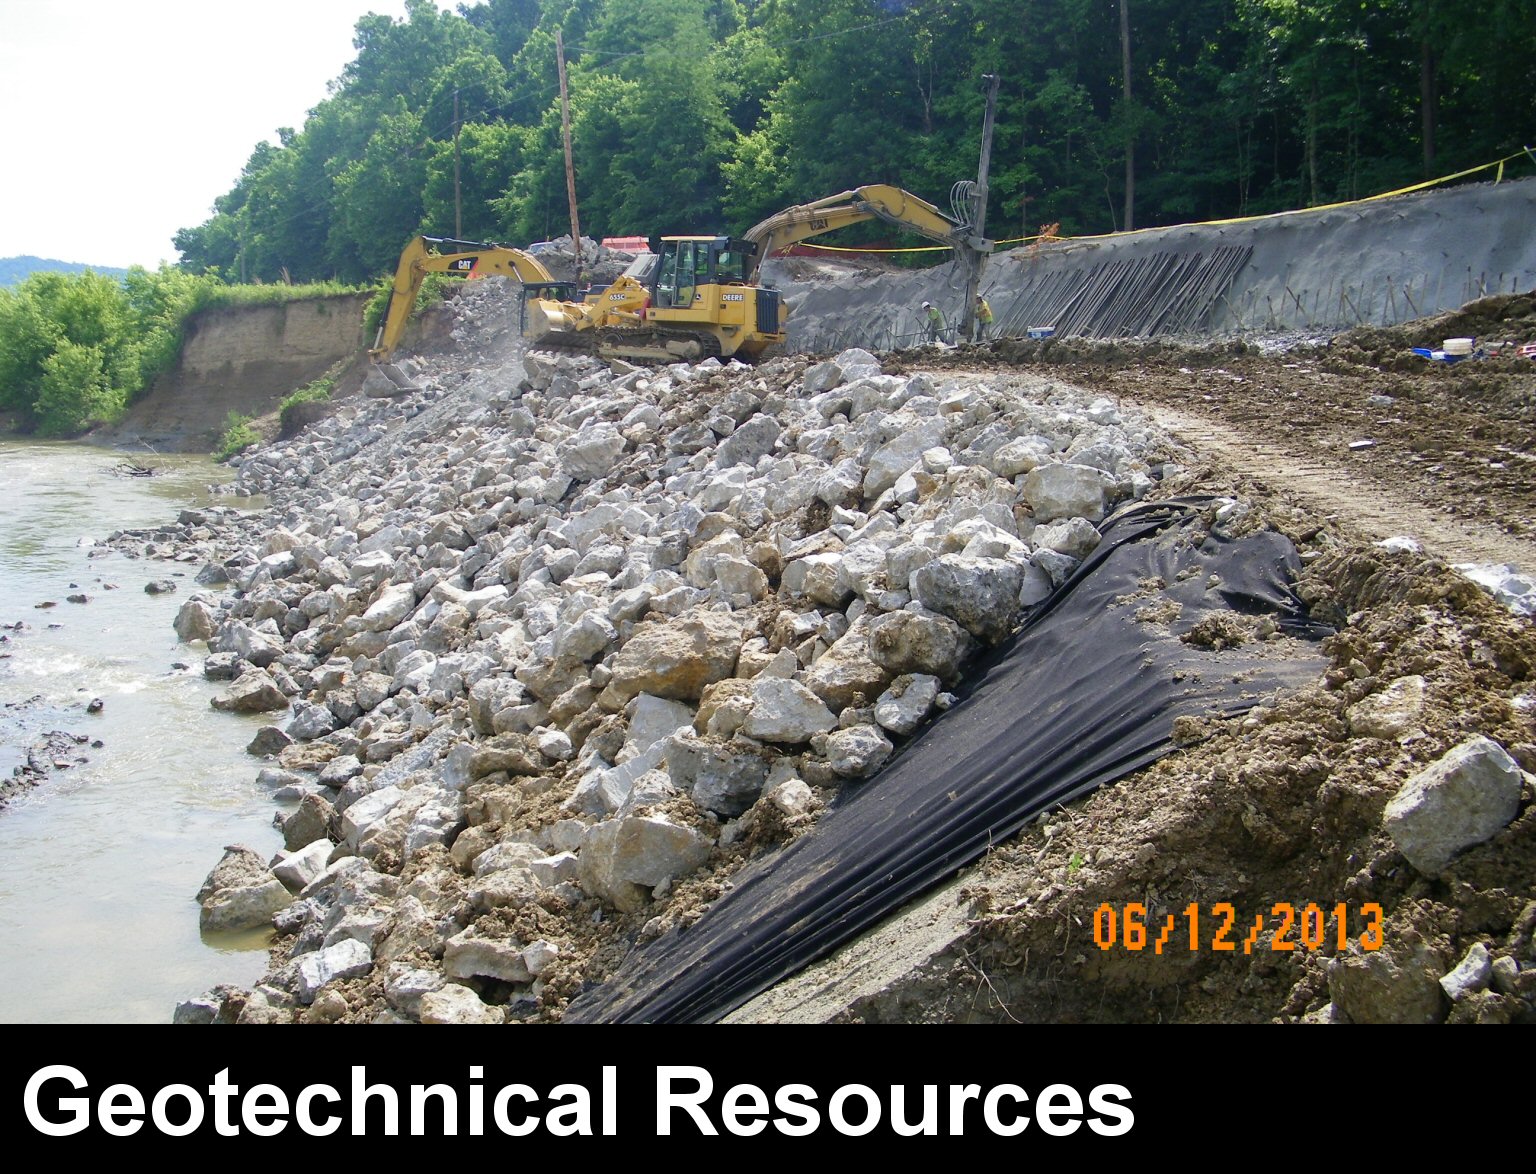 Link to the Geotechnical Resources page